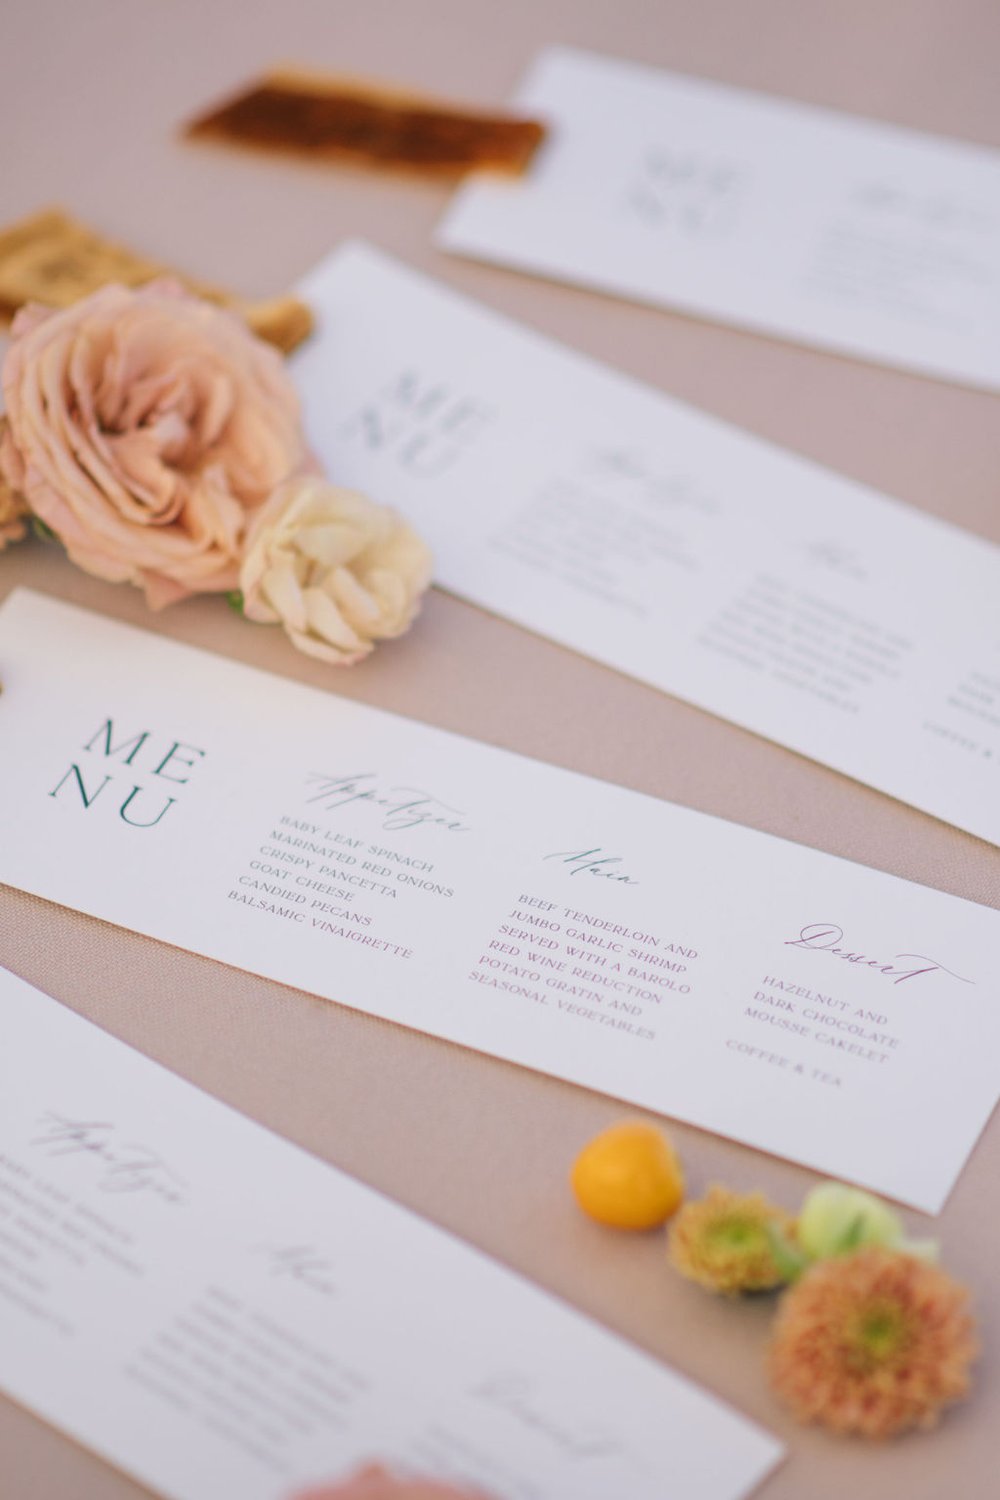 Modern style menu cards by Paper Palette.